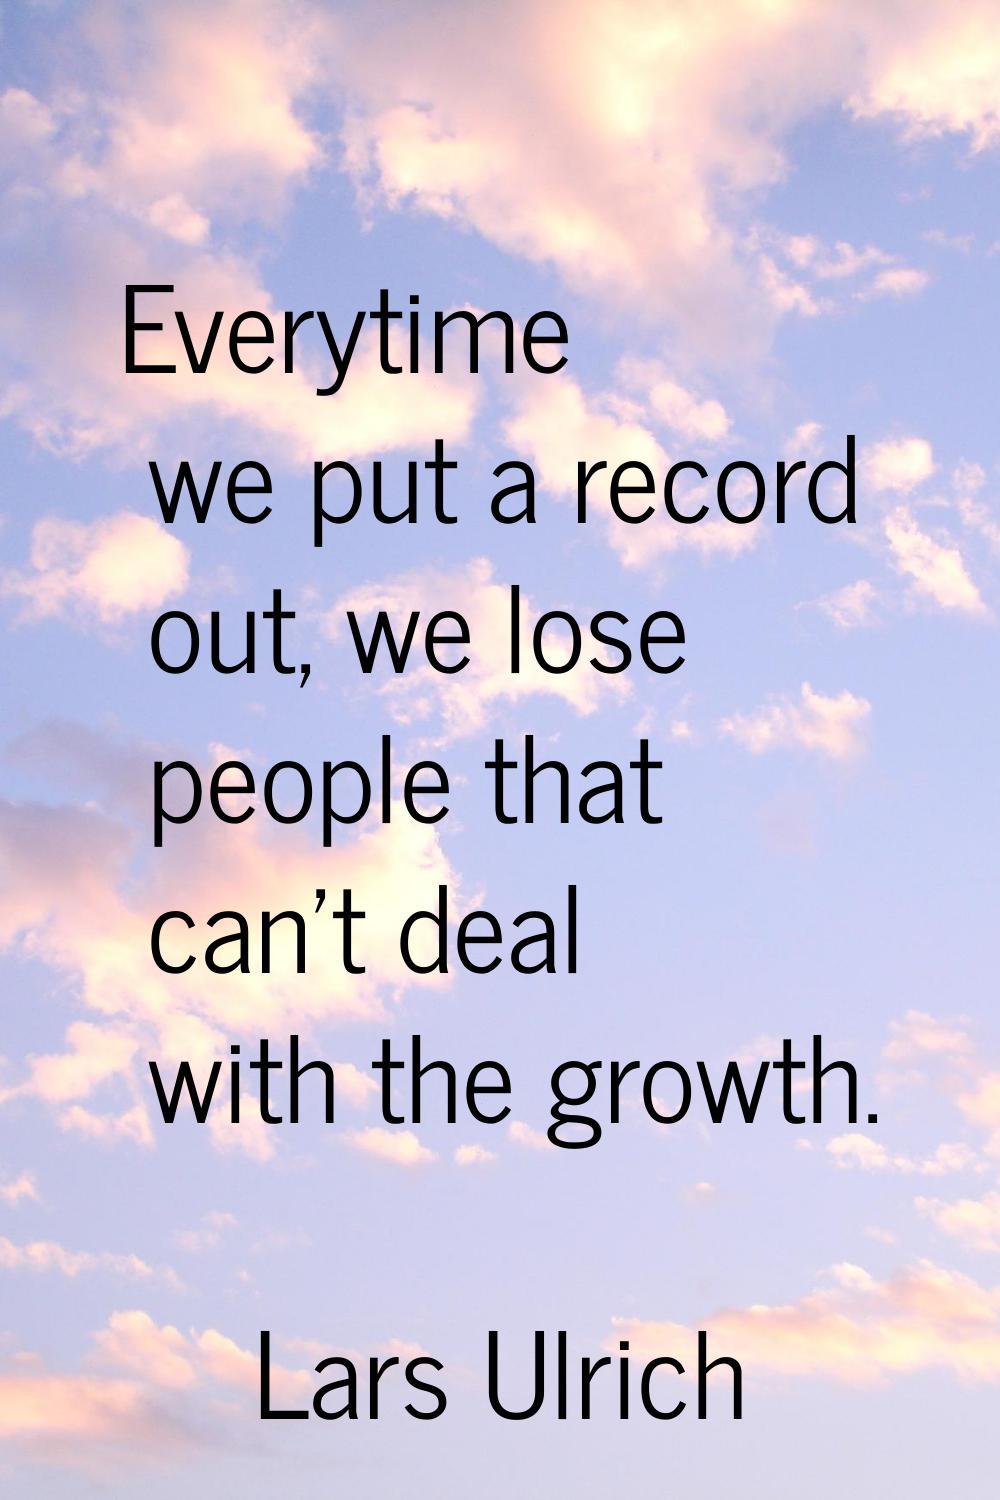 Everytime we put a record out, we lose people that can't deal with the growth.